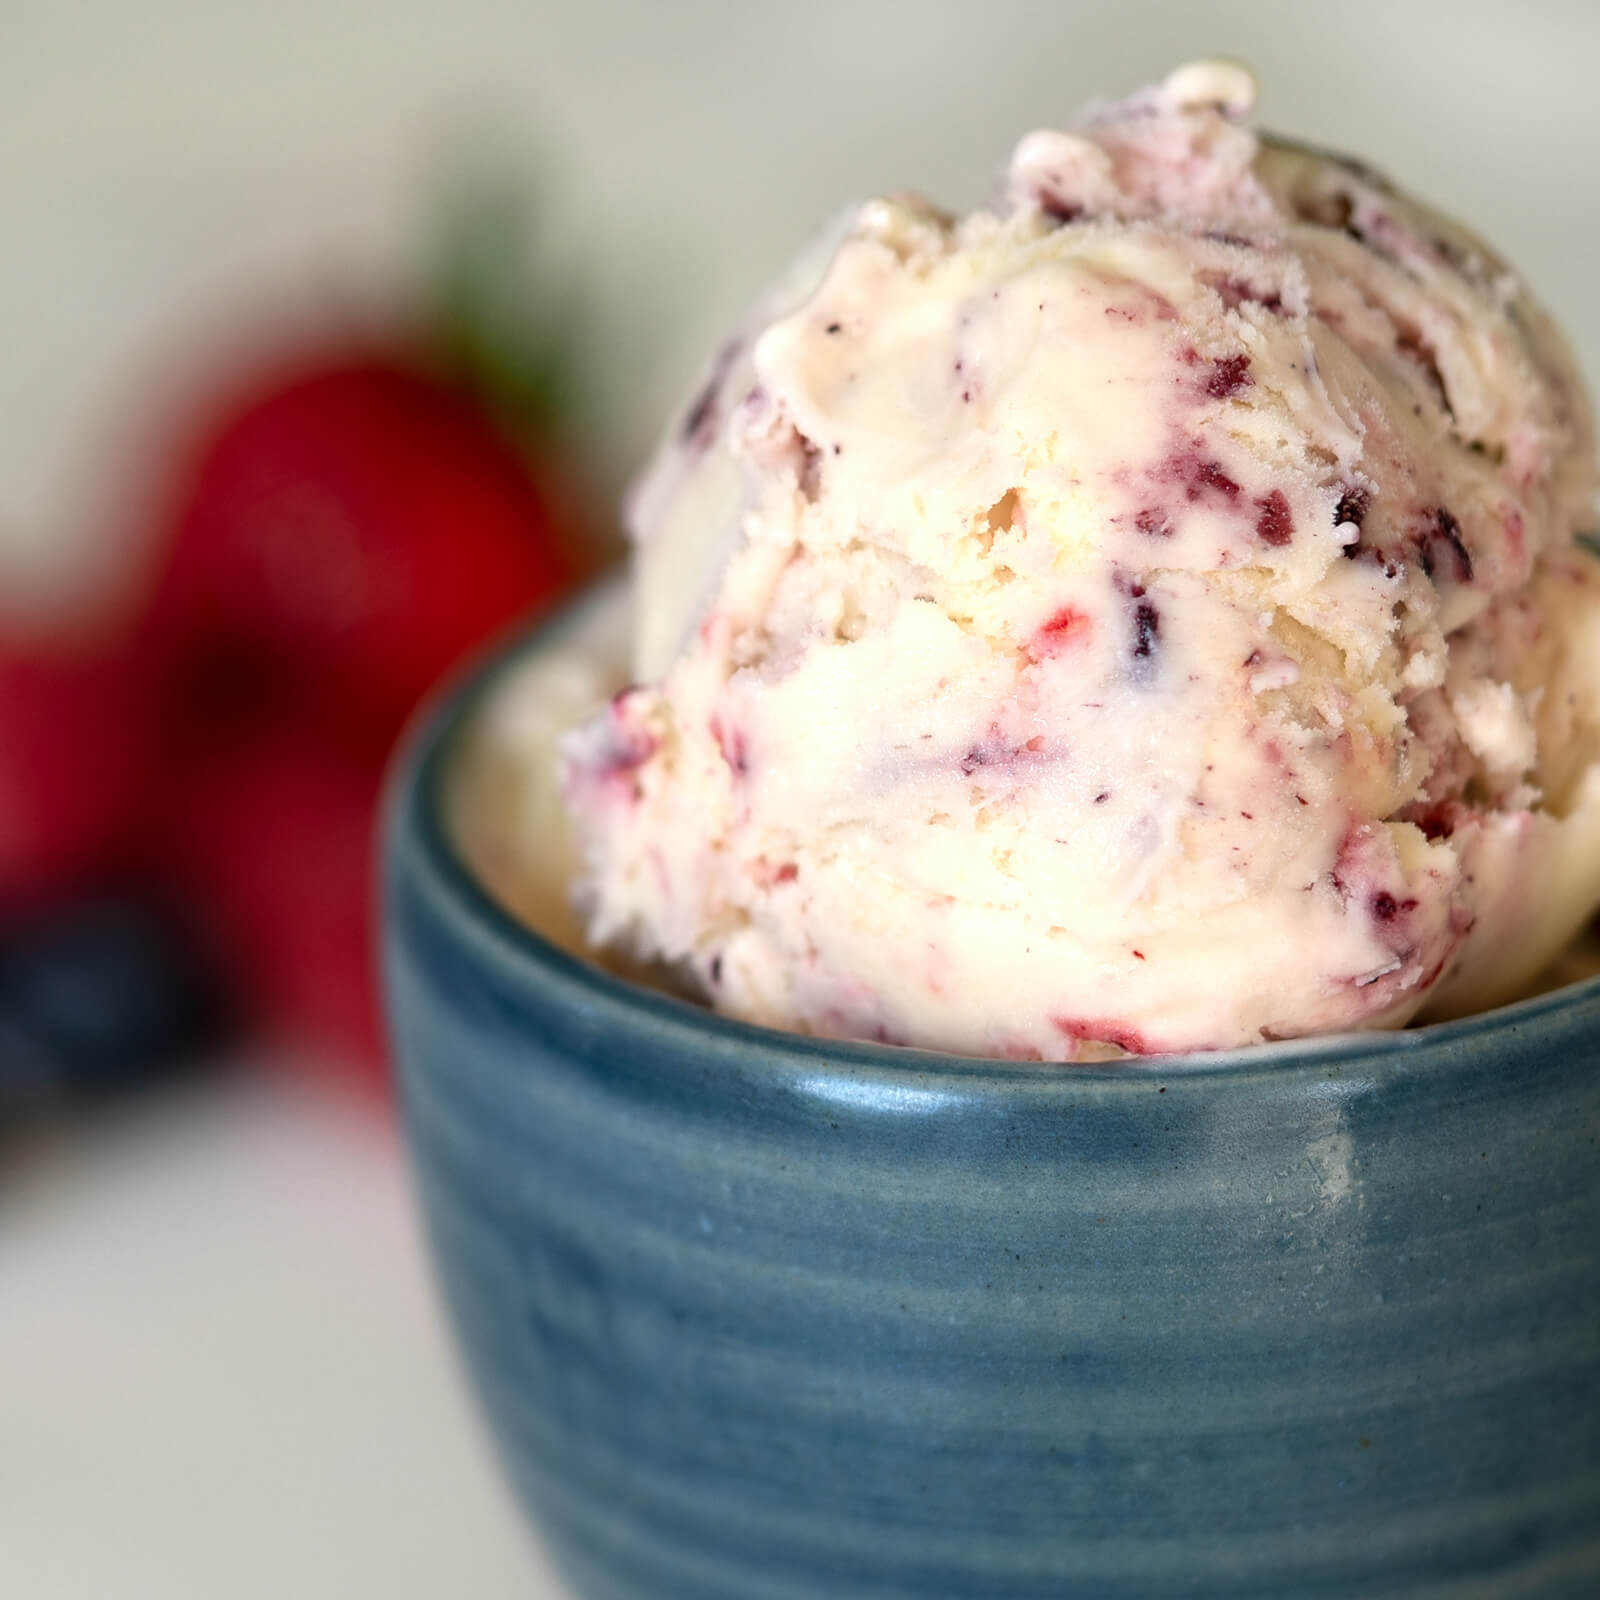 Bold Spoon Creamery’s Mixed Berry flavor